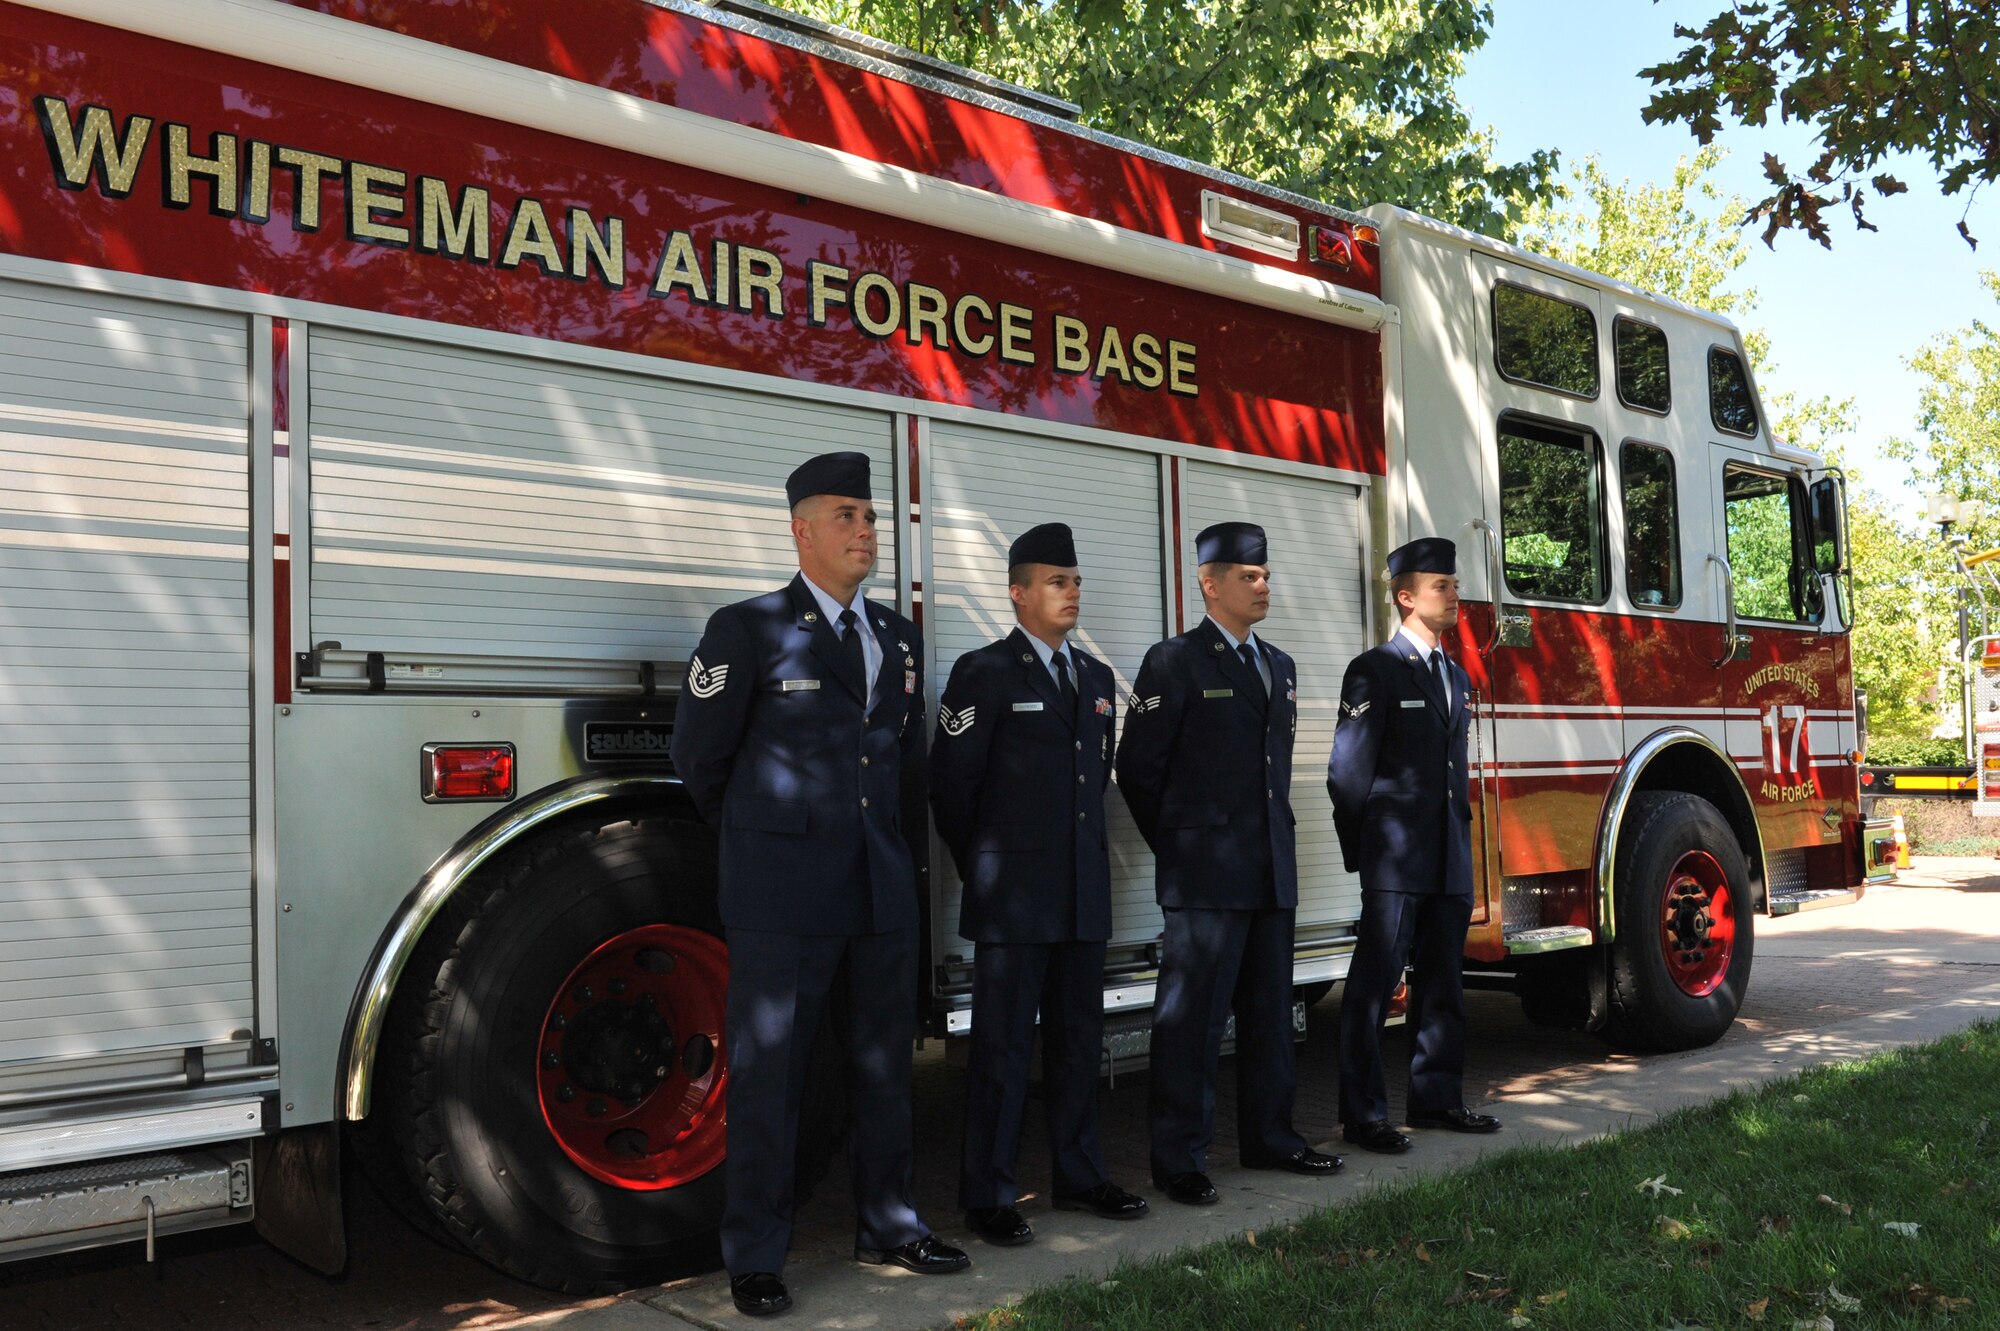 WARRENSBURG, Mo. -- Members of the 509th Civil Engineer Squadron fire department stand at attention prior to a 9/11 Remembrance Ceremony at the University of Central Missouri Sept. 11, 2012. Members of the Collegiate Firefighters Association, local law enforcement and ambulance service personnel from Warrensburg, Johnson County were also in attendance to remember those whose lives were affected by the 9/11 attack. (U.S. Air Force photo/Heidi Hunt) (Released)